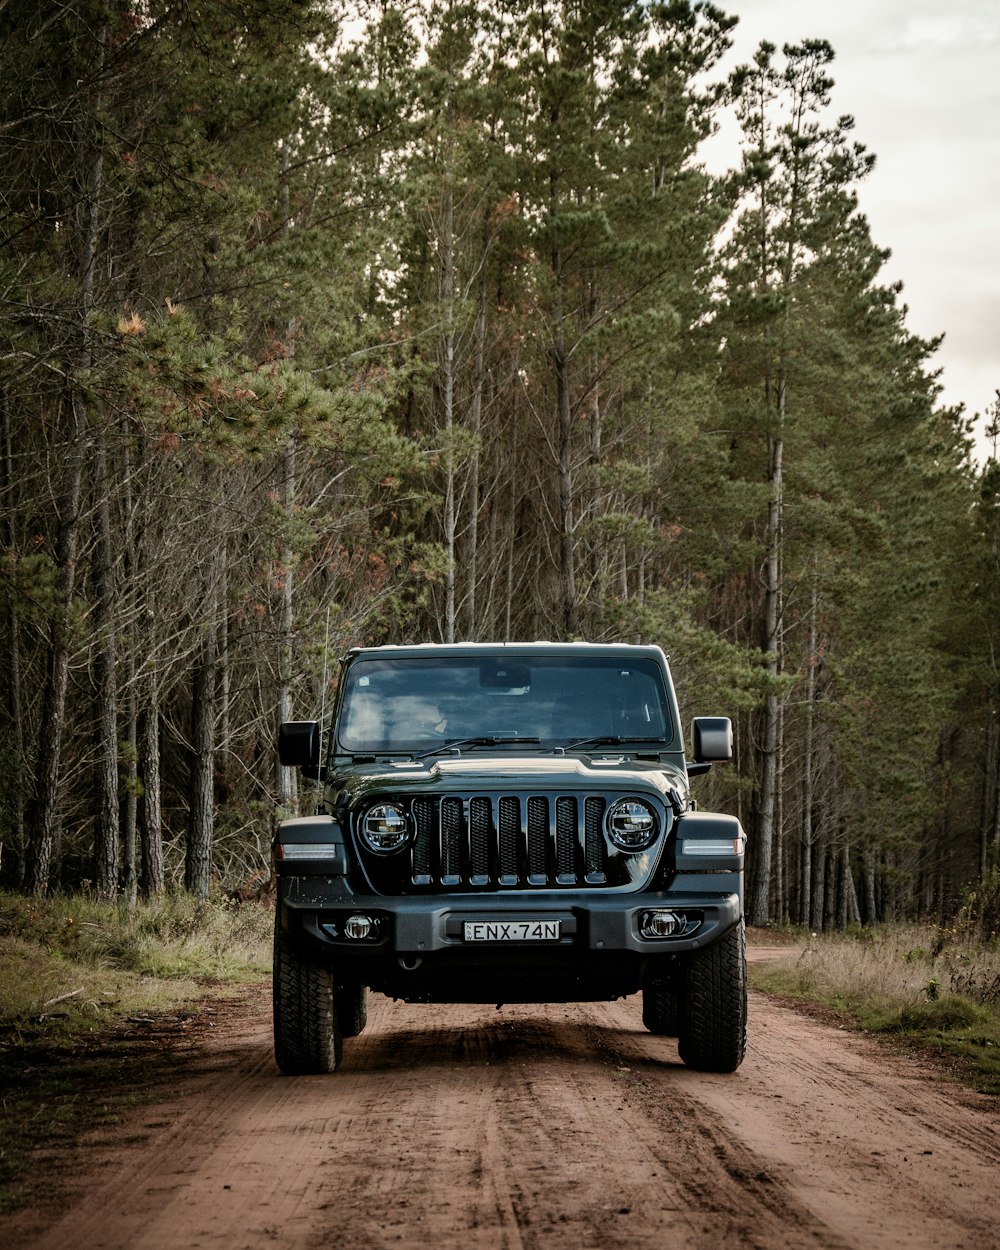 350 Jeep Pictures Hd Download Free Images Stock Photos On Unsplash